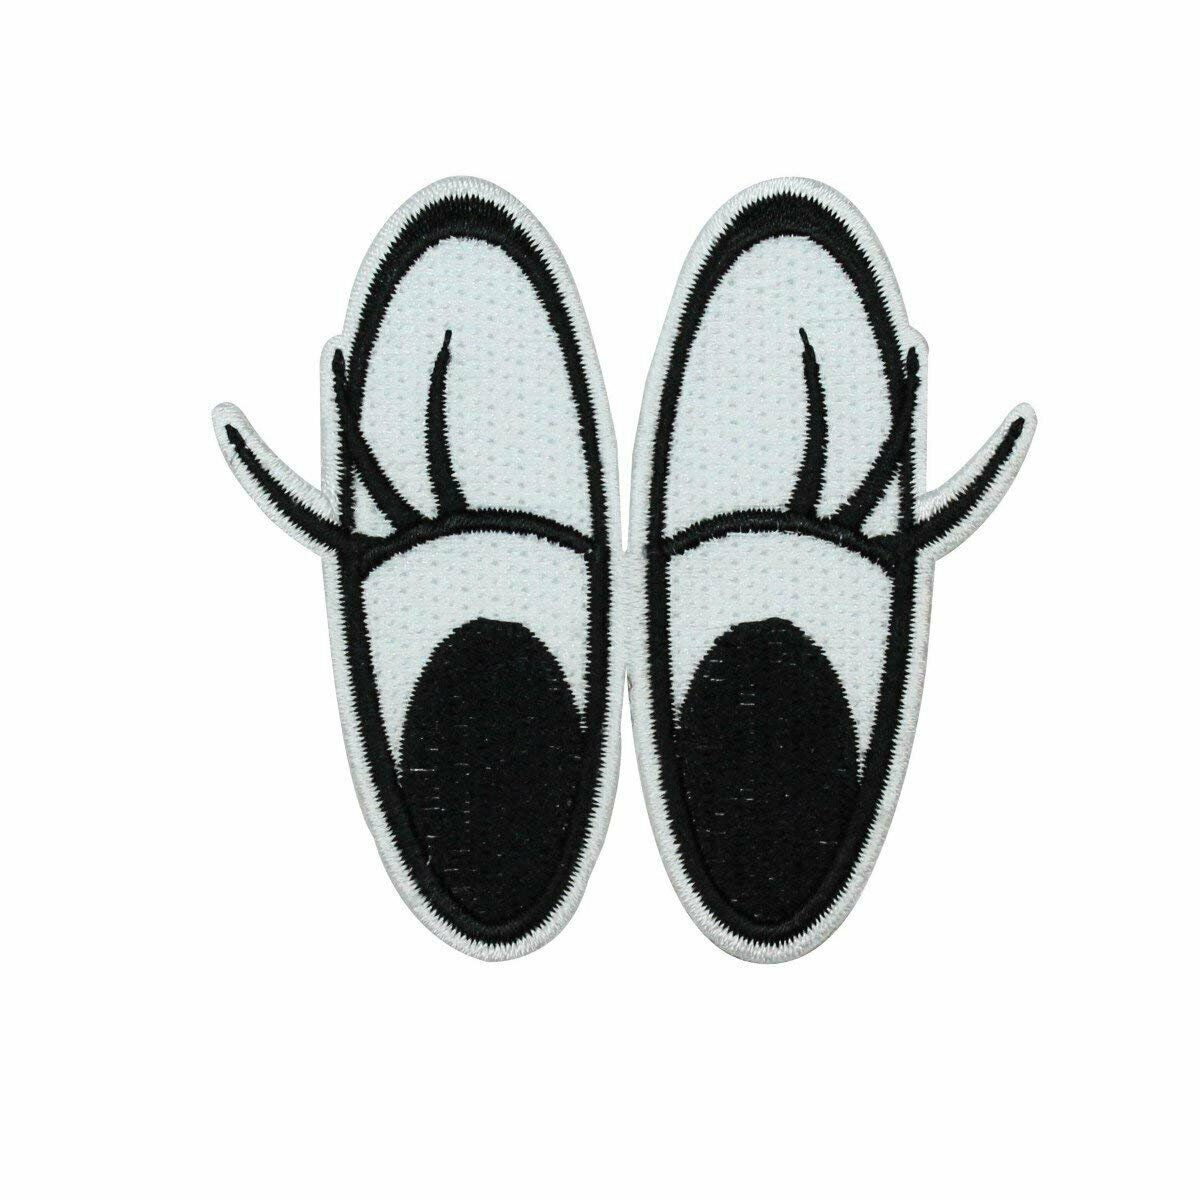 Disney Minnie Mouse Eyes Embroidered Iron On Patch - 010-M